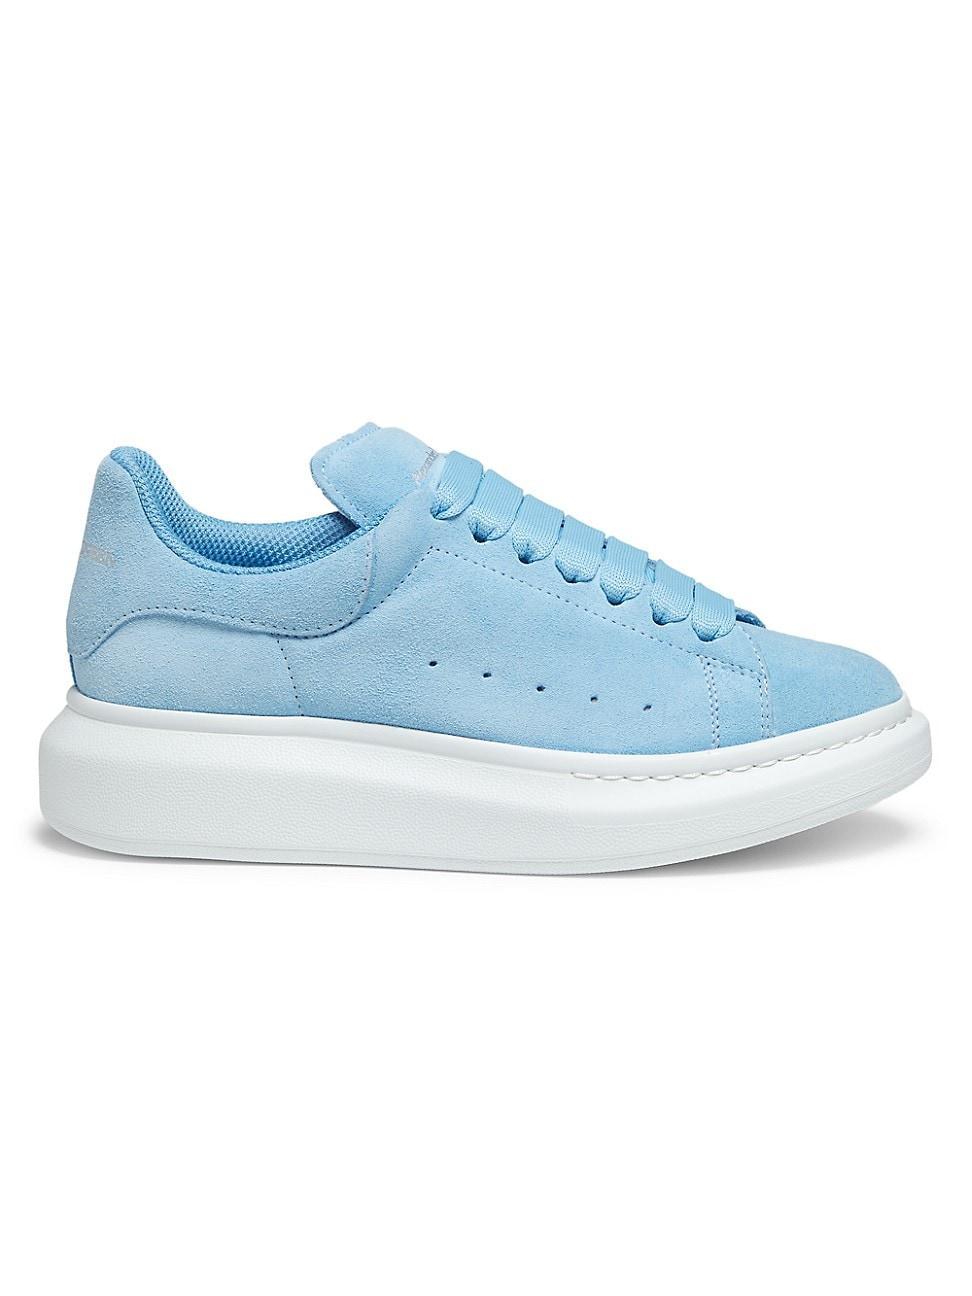 Leather Low-Top Sneakers Product Image